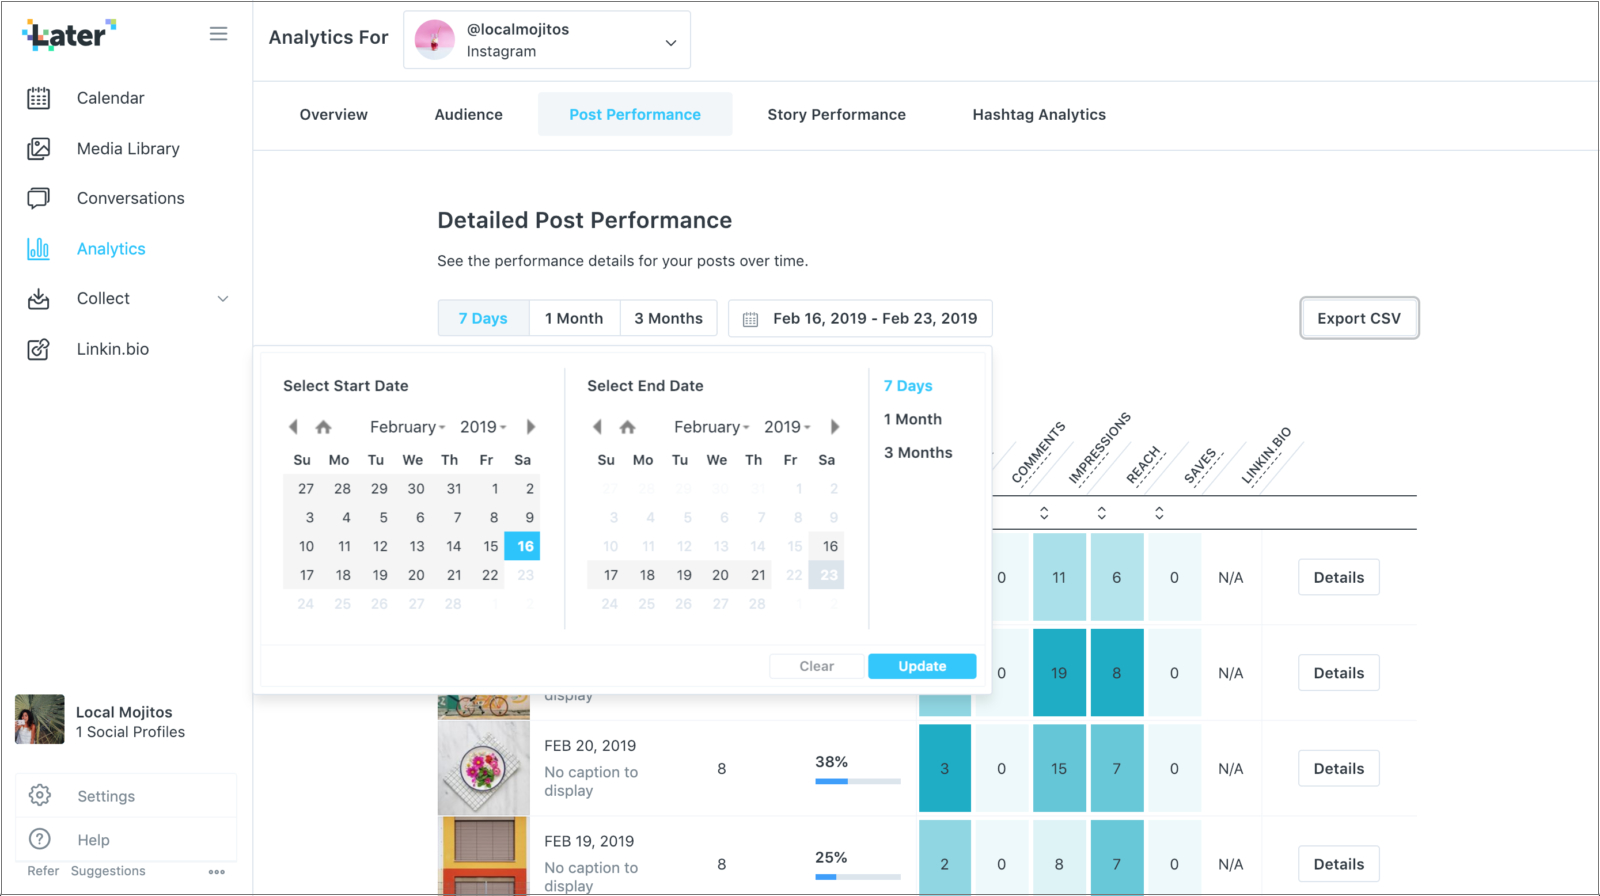 How To Build A Monthly Social Media Report Within Social Media Report Template